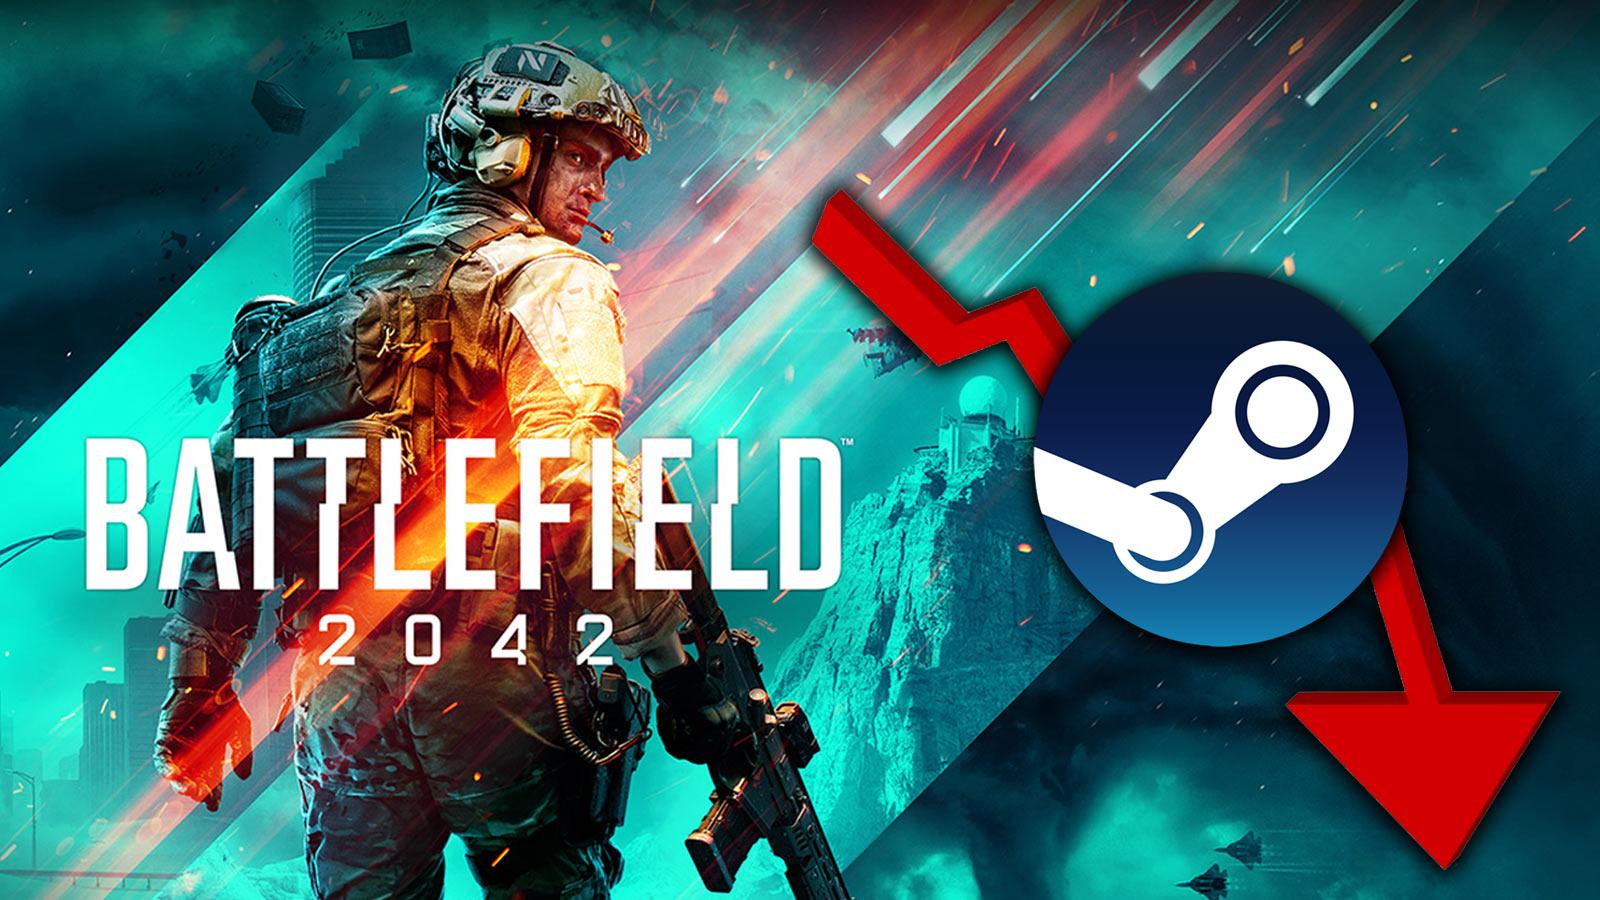 An image of Battlefield 2042 and the steam logo.